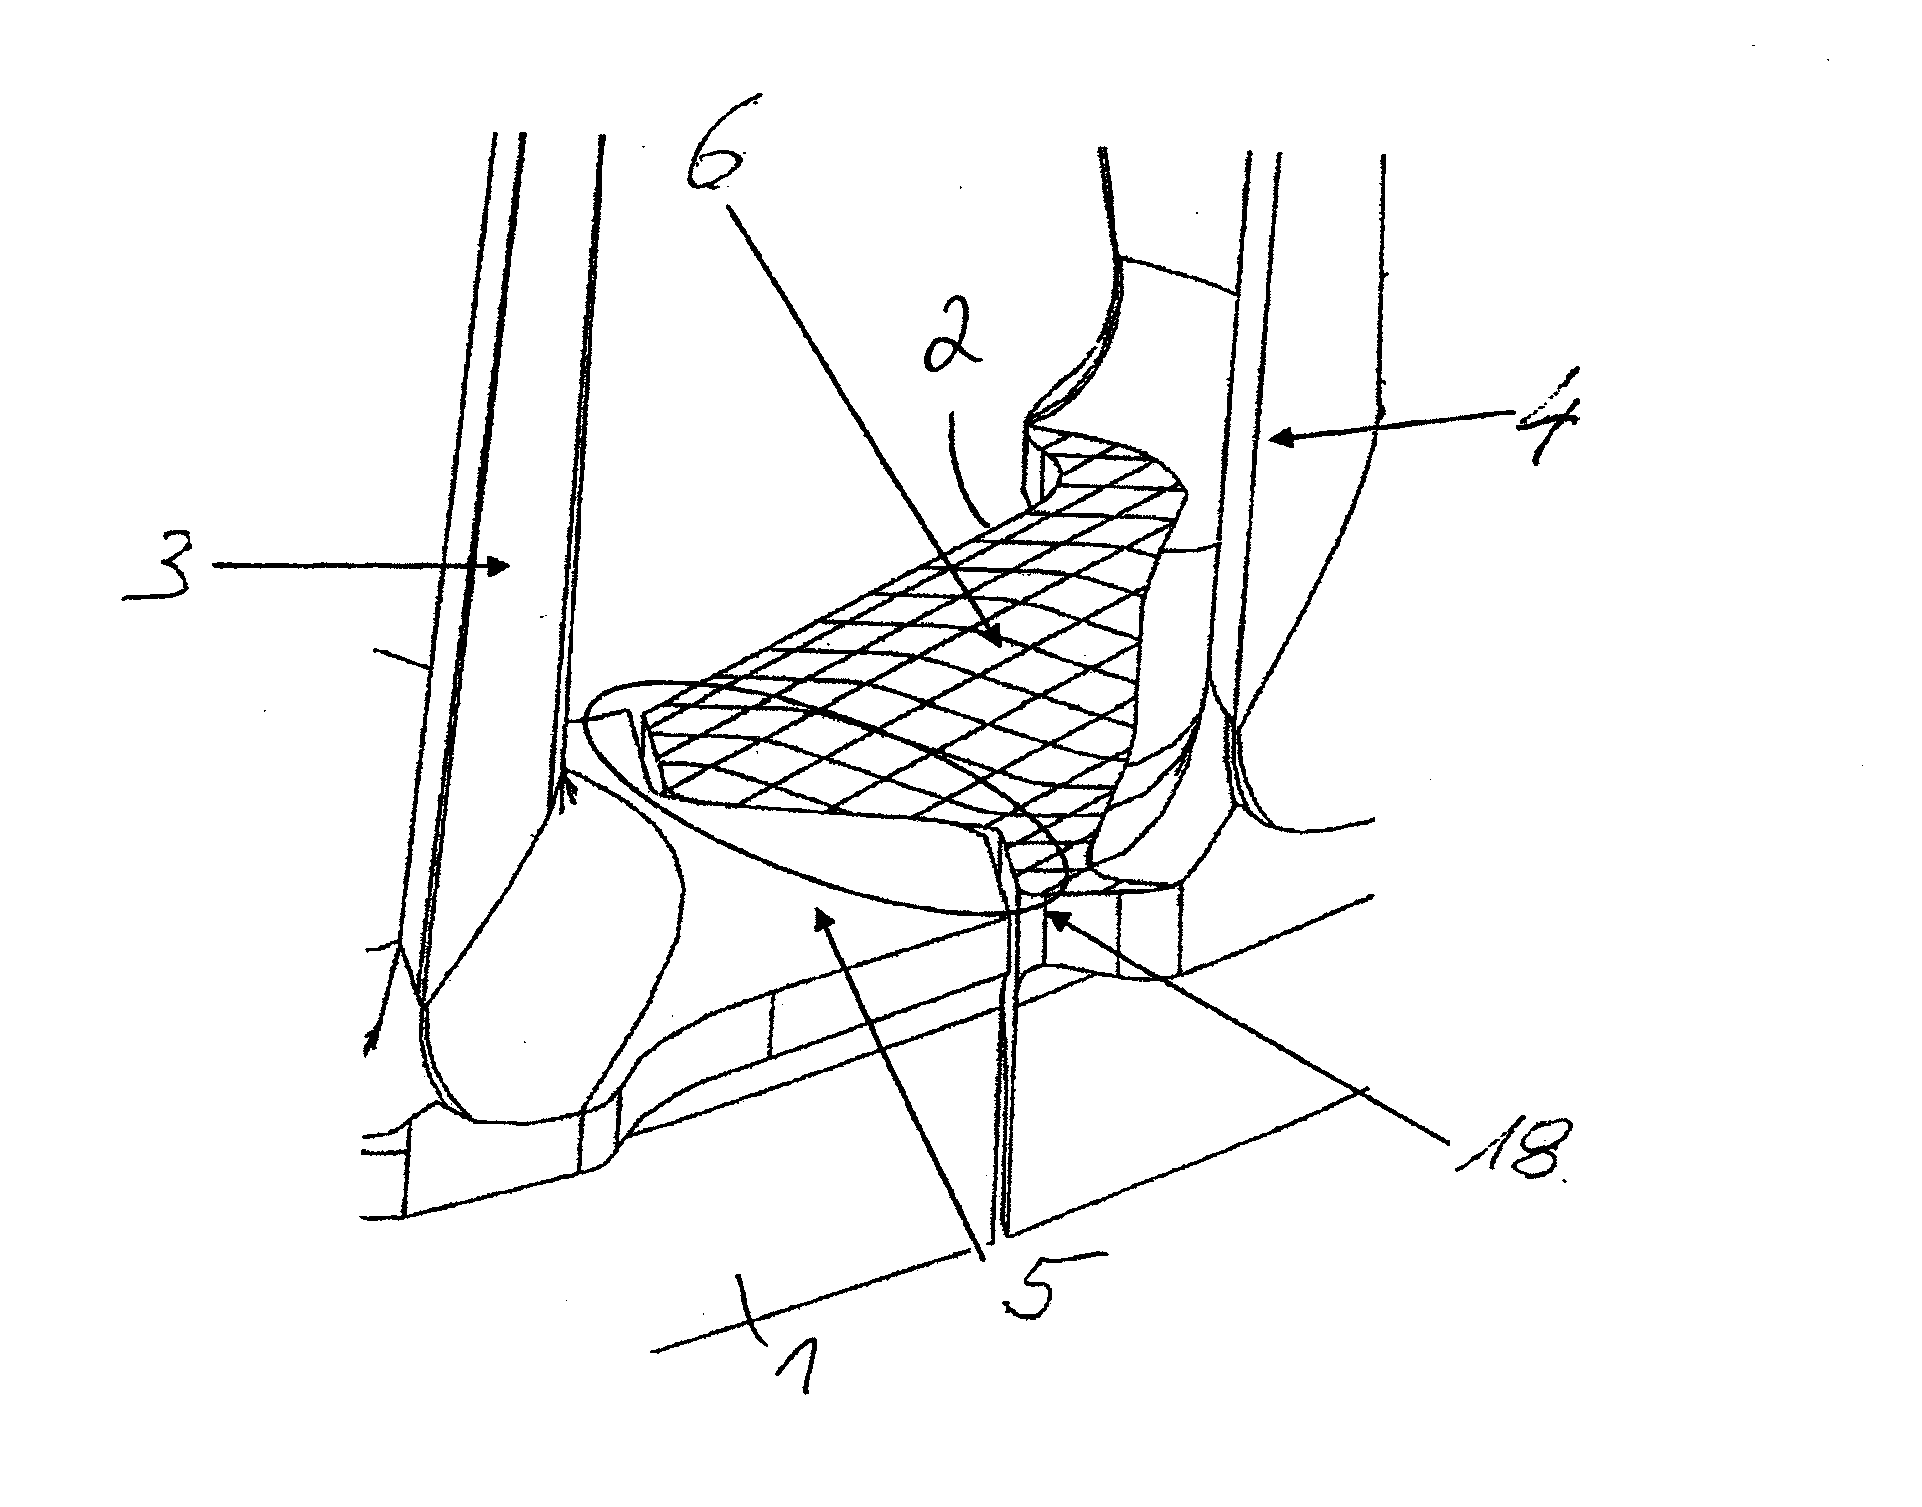 Blade ring segment having an annular space delimiting surface having a wavy height profile and a method for manufacturing same